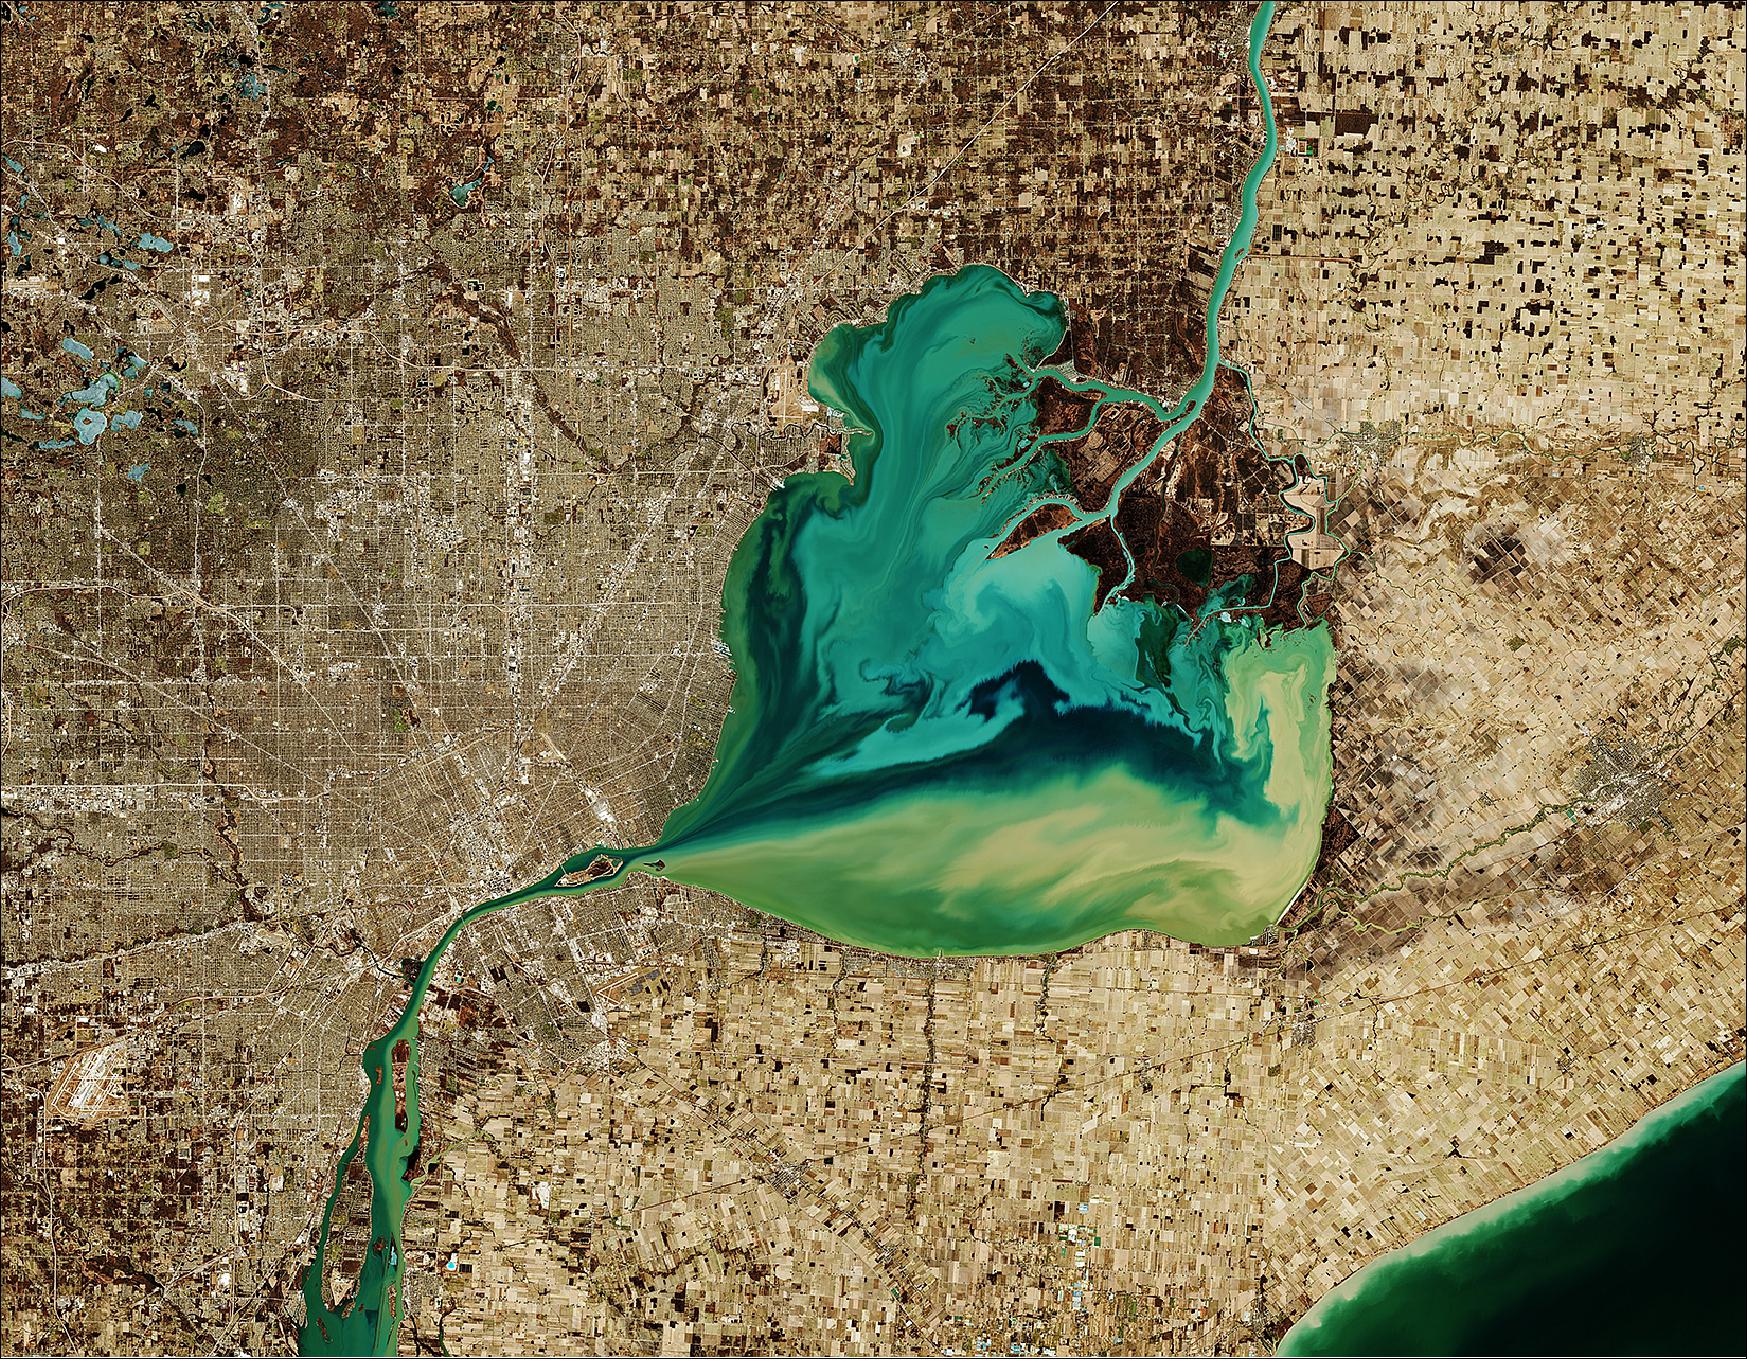 Figure 3: The Saint Clair River is visible at the top of the image and flows southwards, connecting the southern end of Lake Huron with Lake St. Clair, visible in the center of the image. The river branches into several channels before reaching the lake, creating a seven-mouth delta. Much of the area surrounding the delta is used for agriculture. In this wintery image, captured on 26 March 2019, many of the frozen lakes northwest of the lake can be seen partially frozen over. The Copernicus Sentinel-2 mission allows inland bodies of water to be closely monitored. This image is also featured on the Earth from Space video program (image credit: ESA, the image contains modified Copernicus Sentinel data (2019), processed by ESA, CC BY-SA 3.0 IGO)